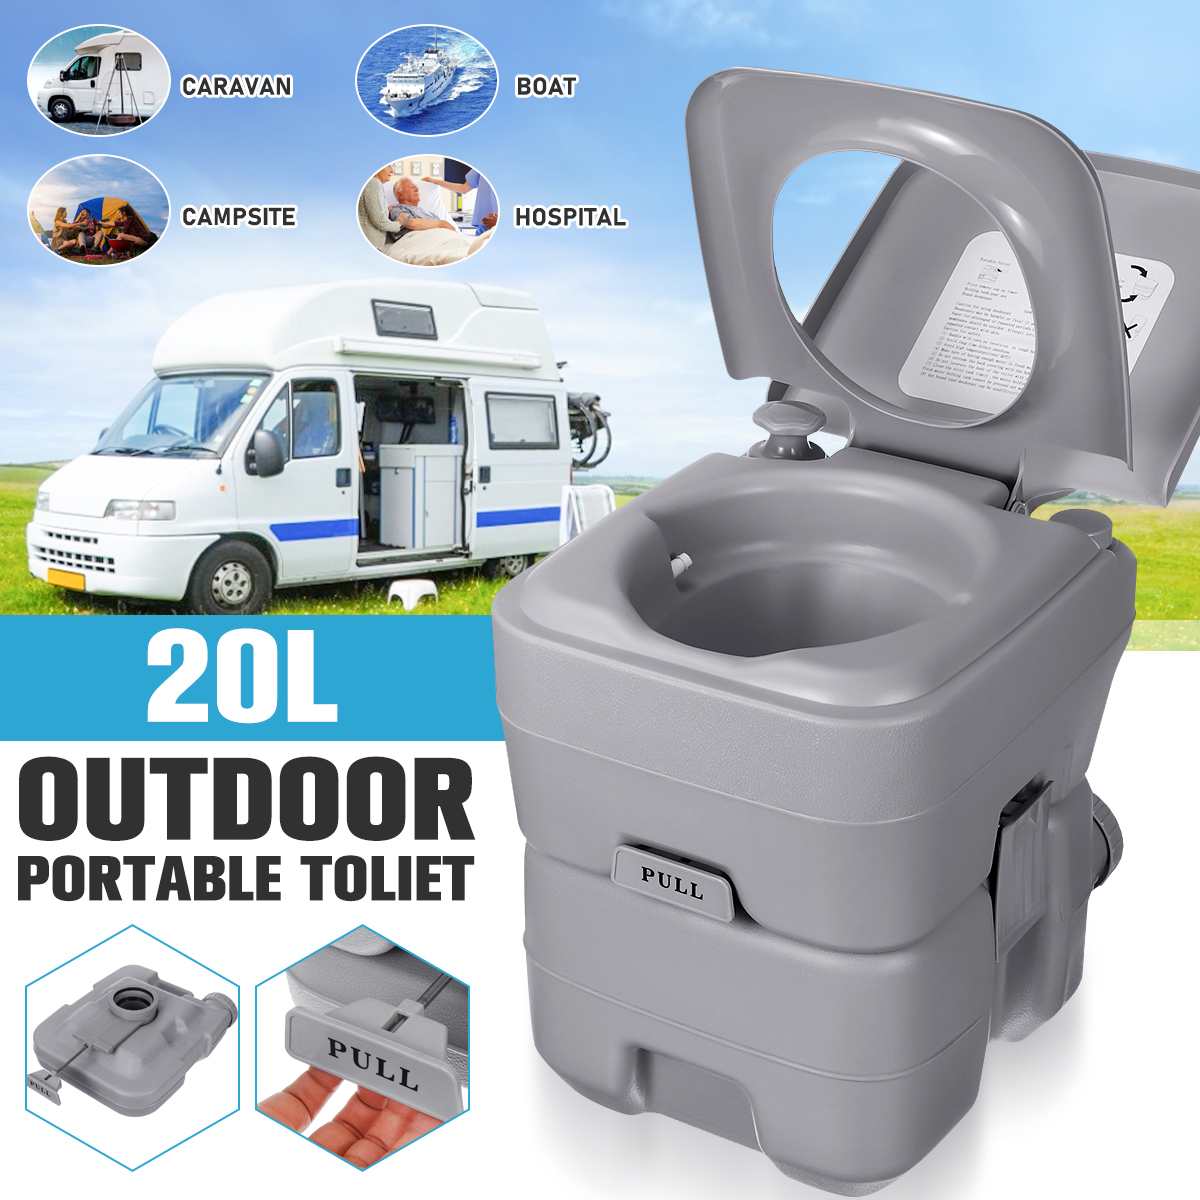 Portable Toilet for Truck Drivers, Outdoor Camping, Adults, Children, Home, Hospital. Travel, Boating, Fishing